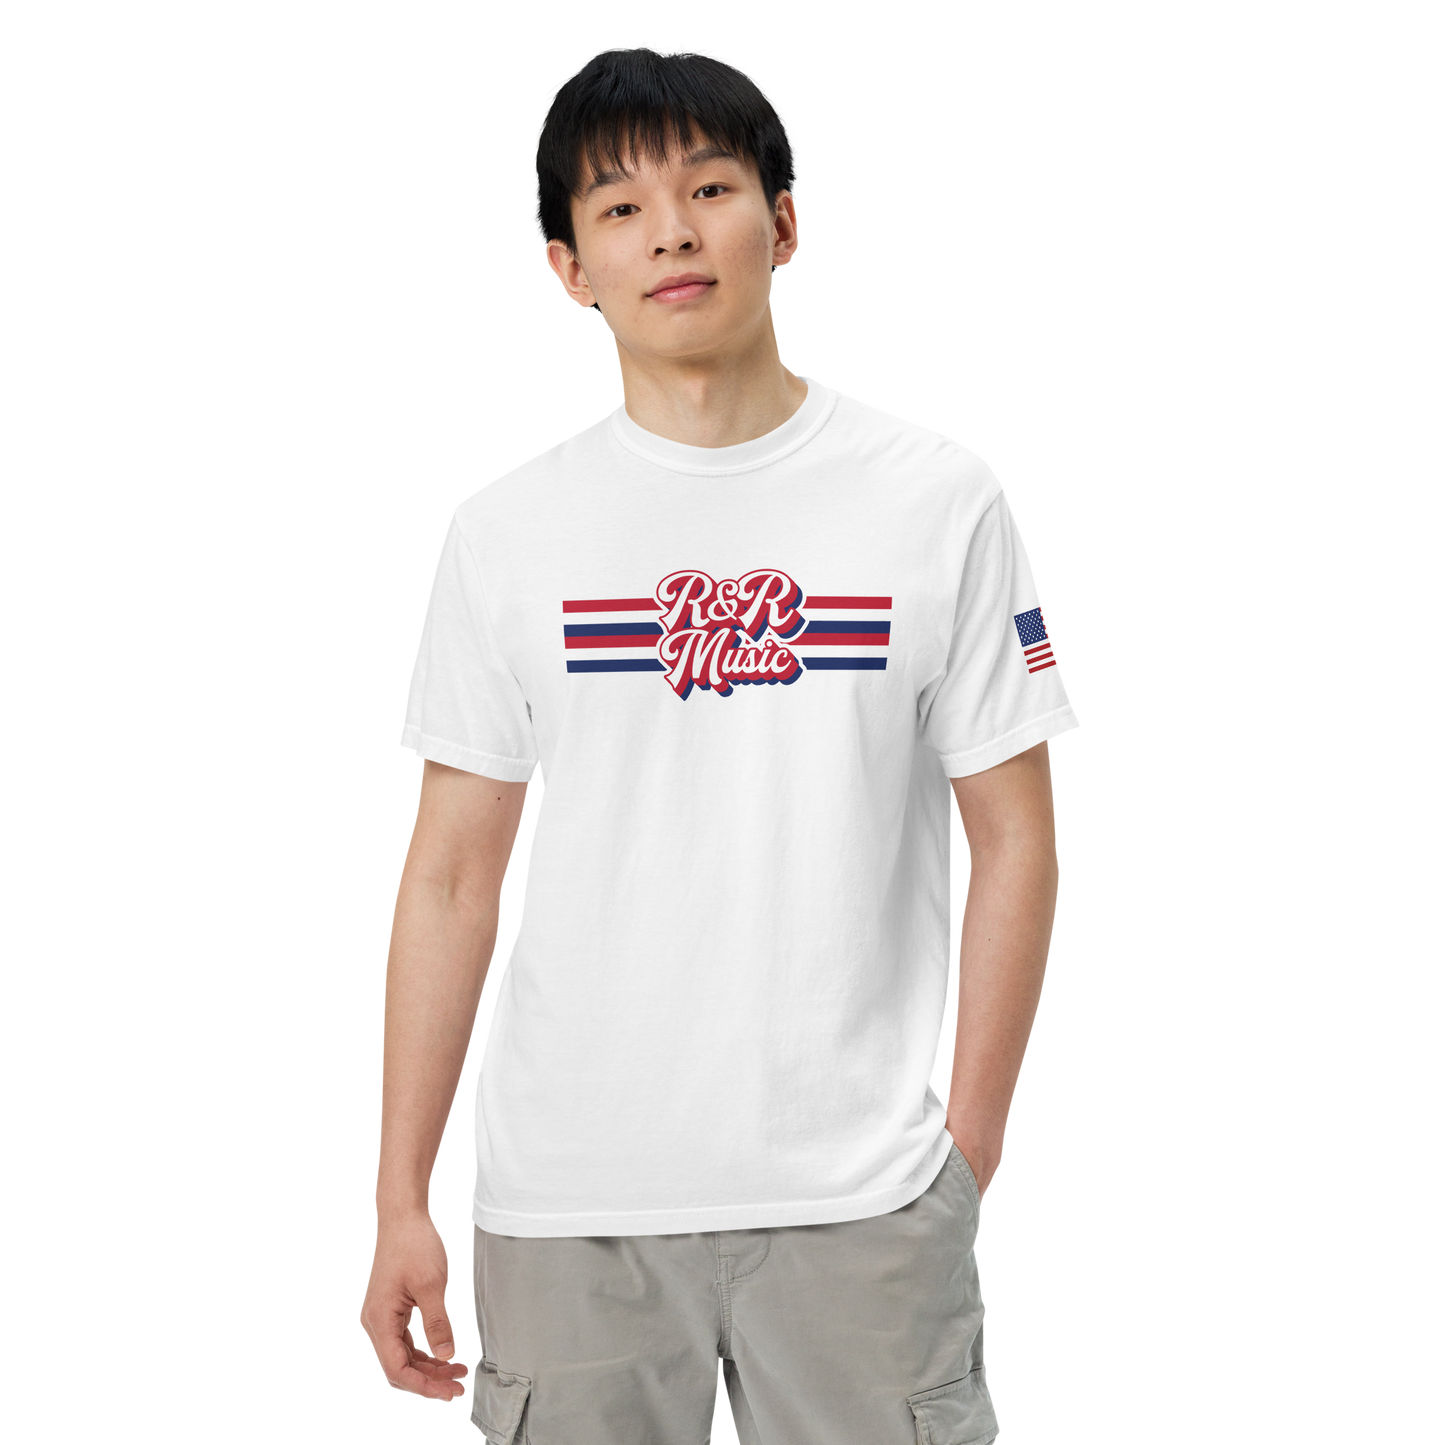 4th of July Special R&R Music Tee